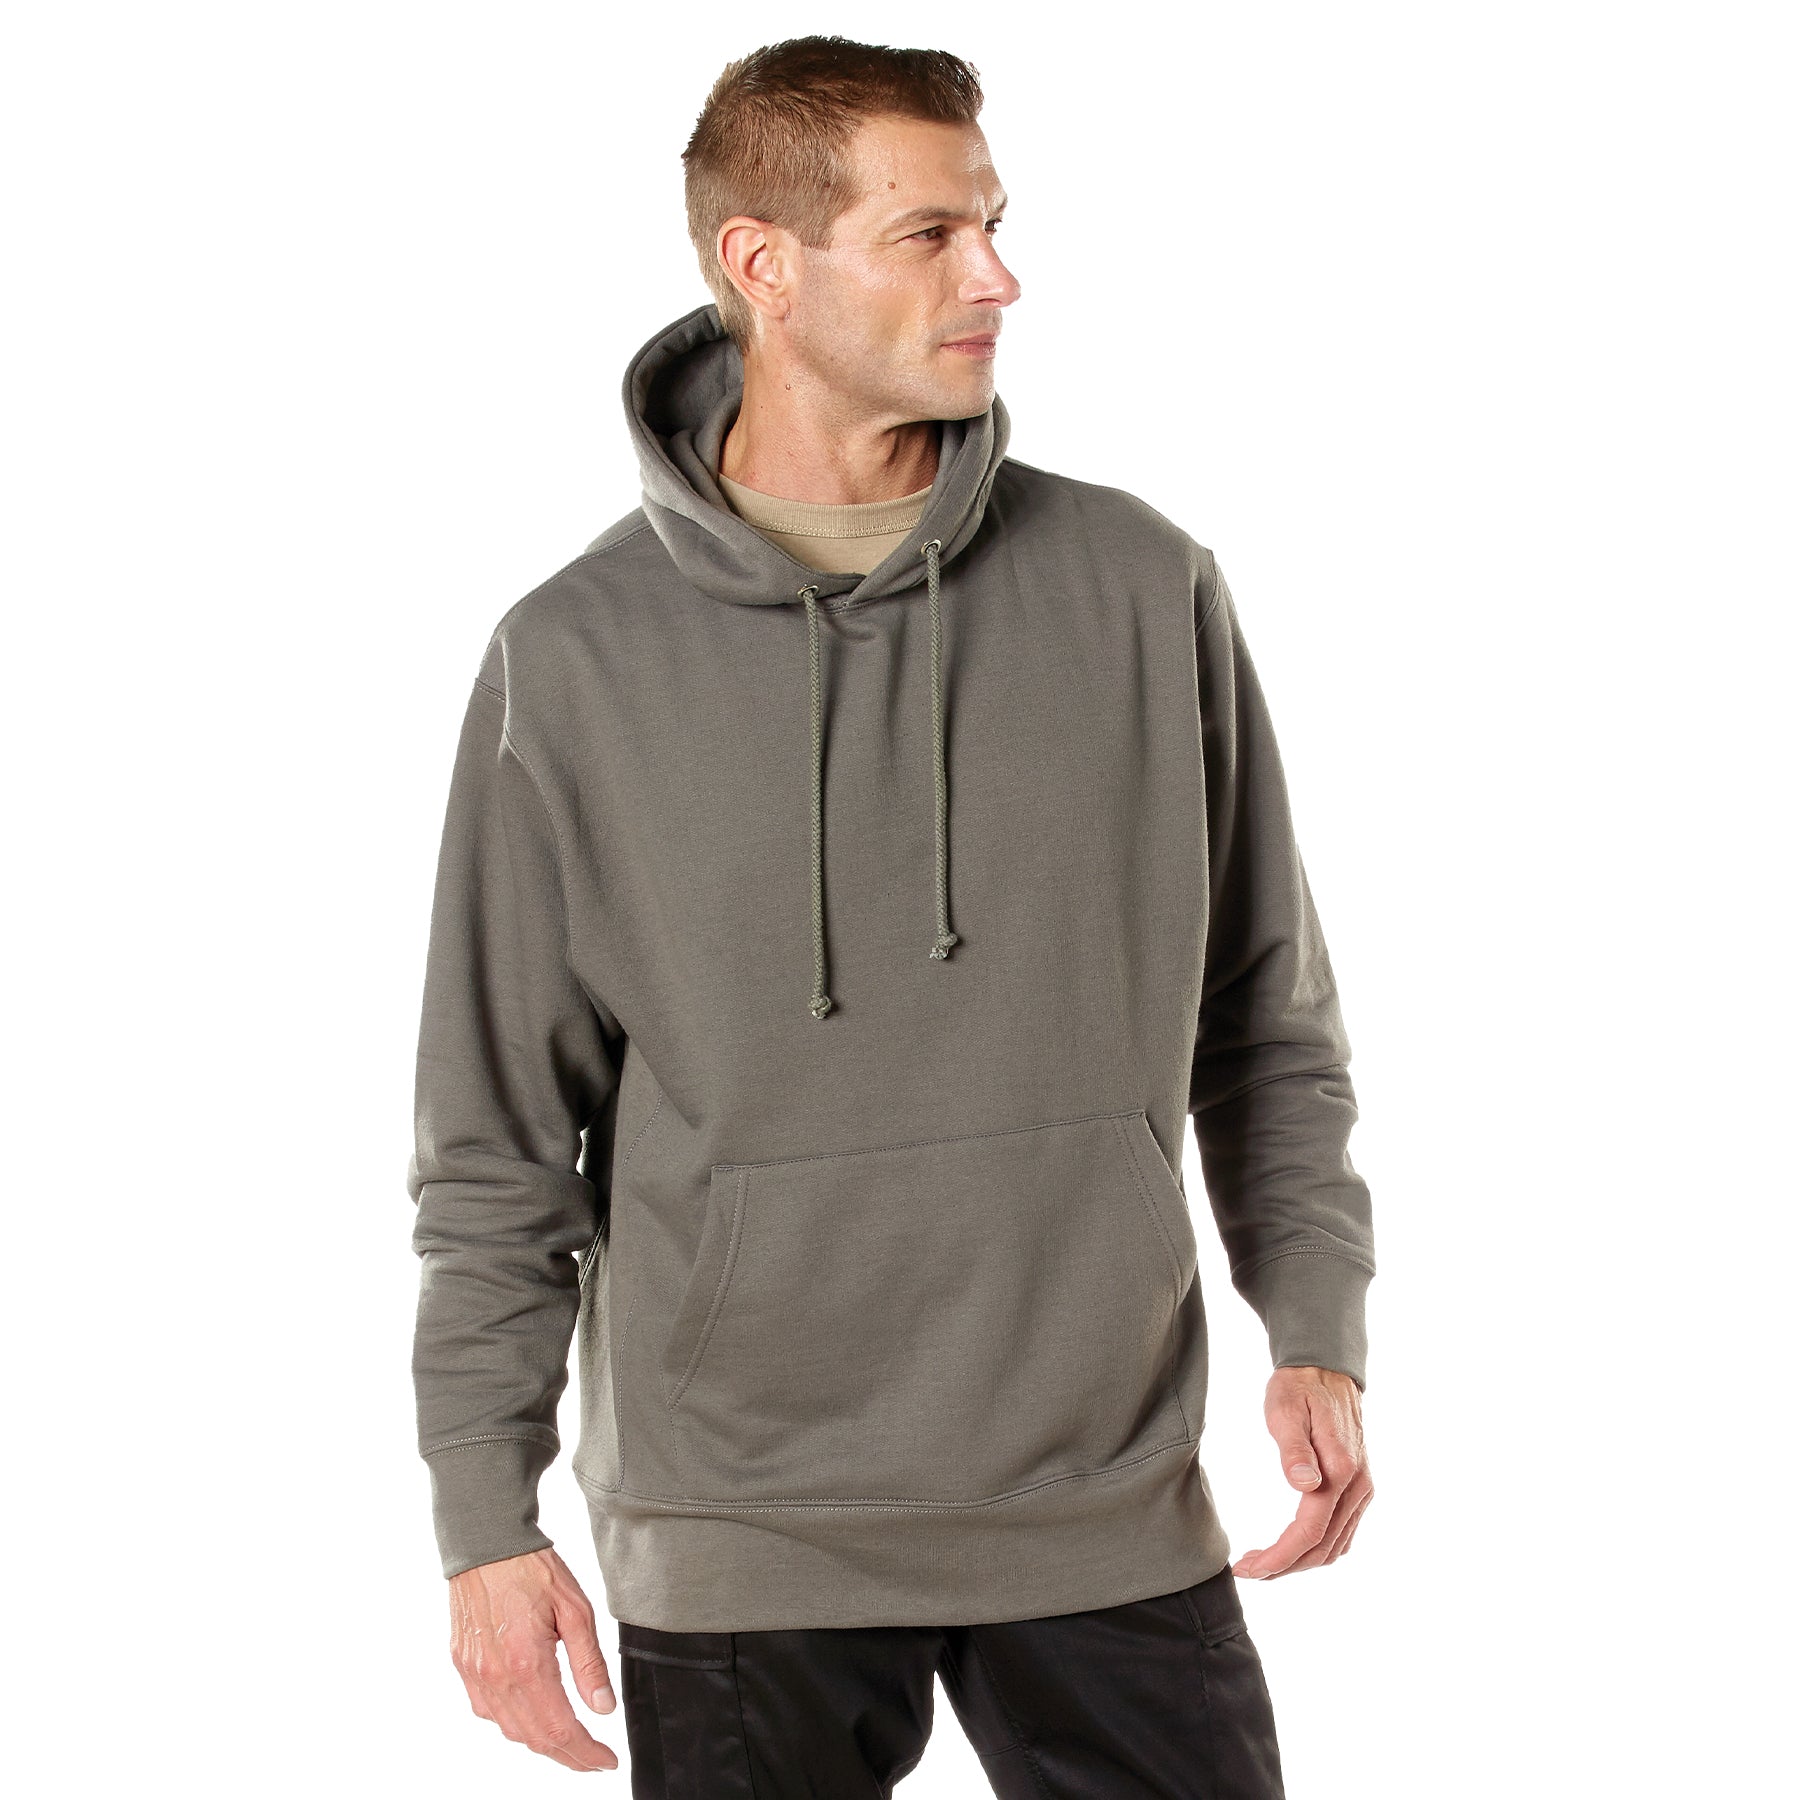 Rothco Every Day Pullover Hooded Sweatshirt Grey